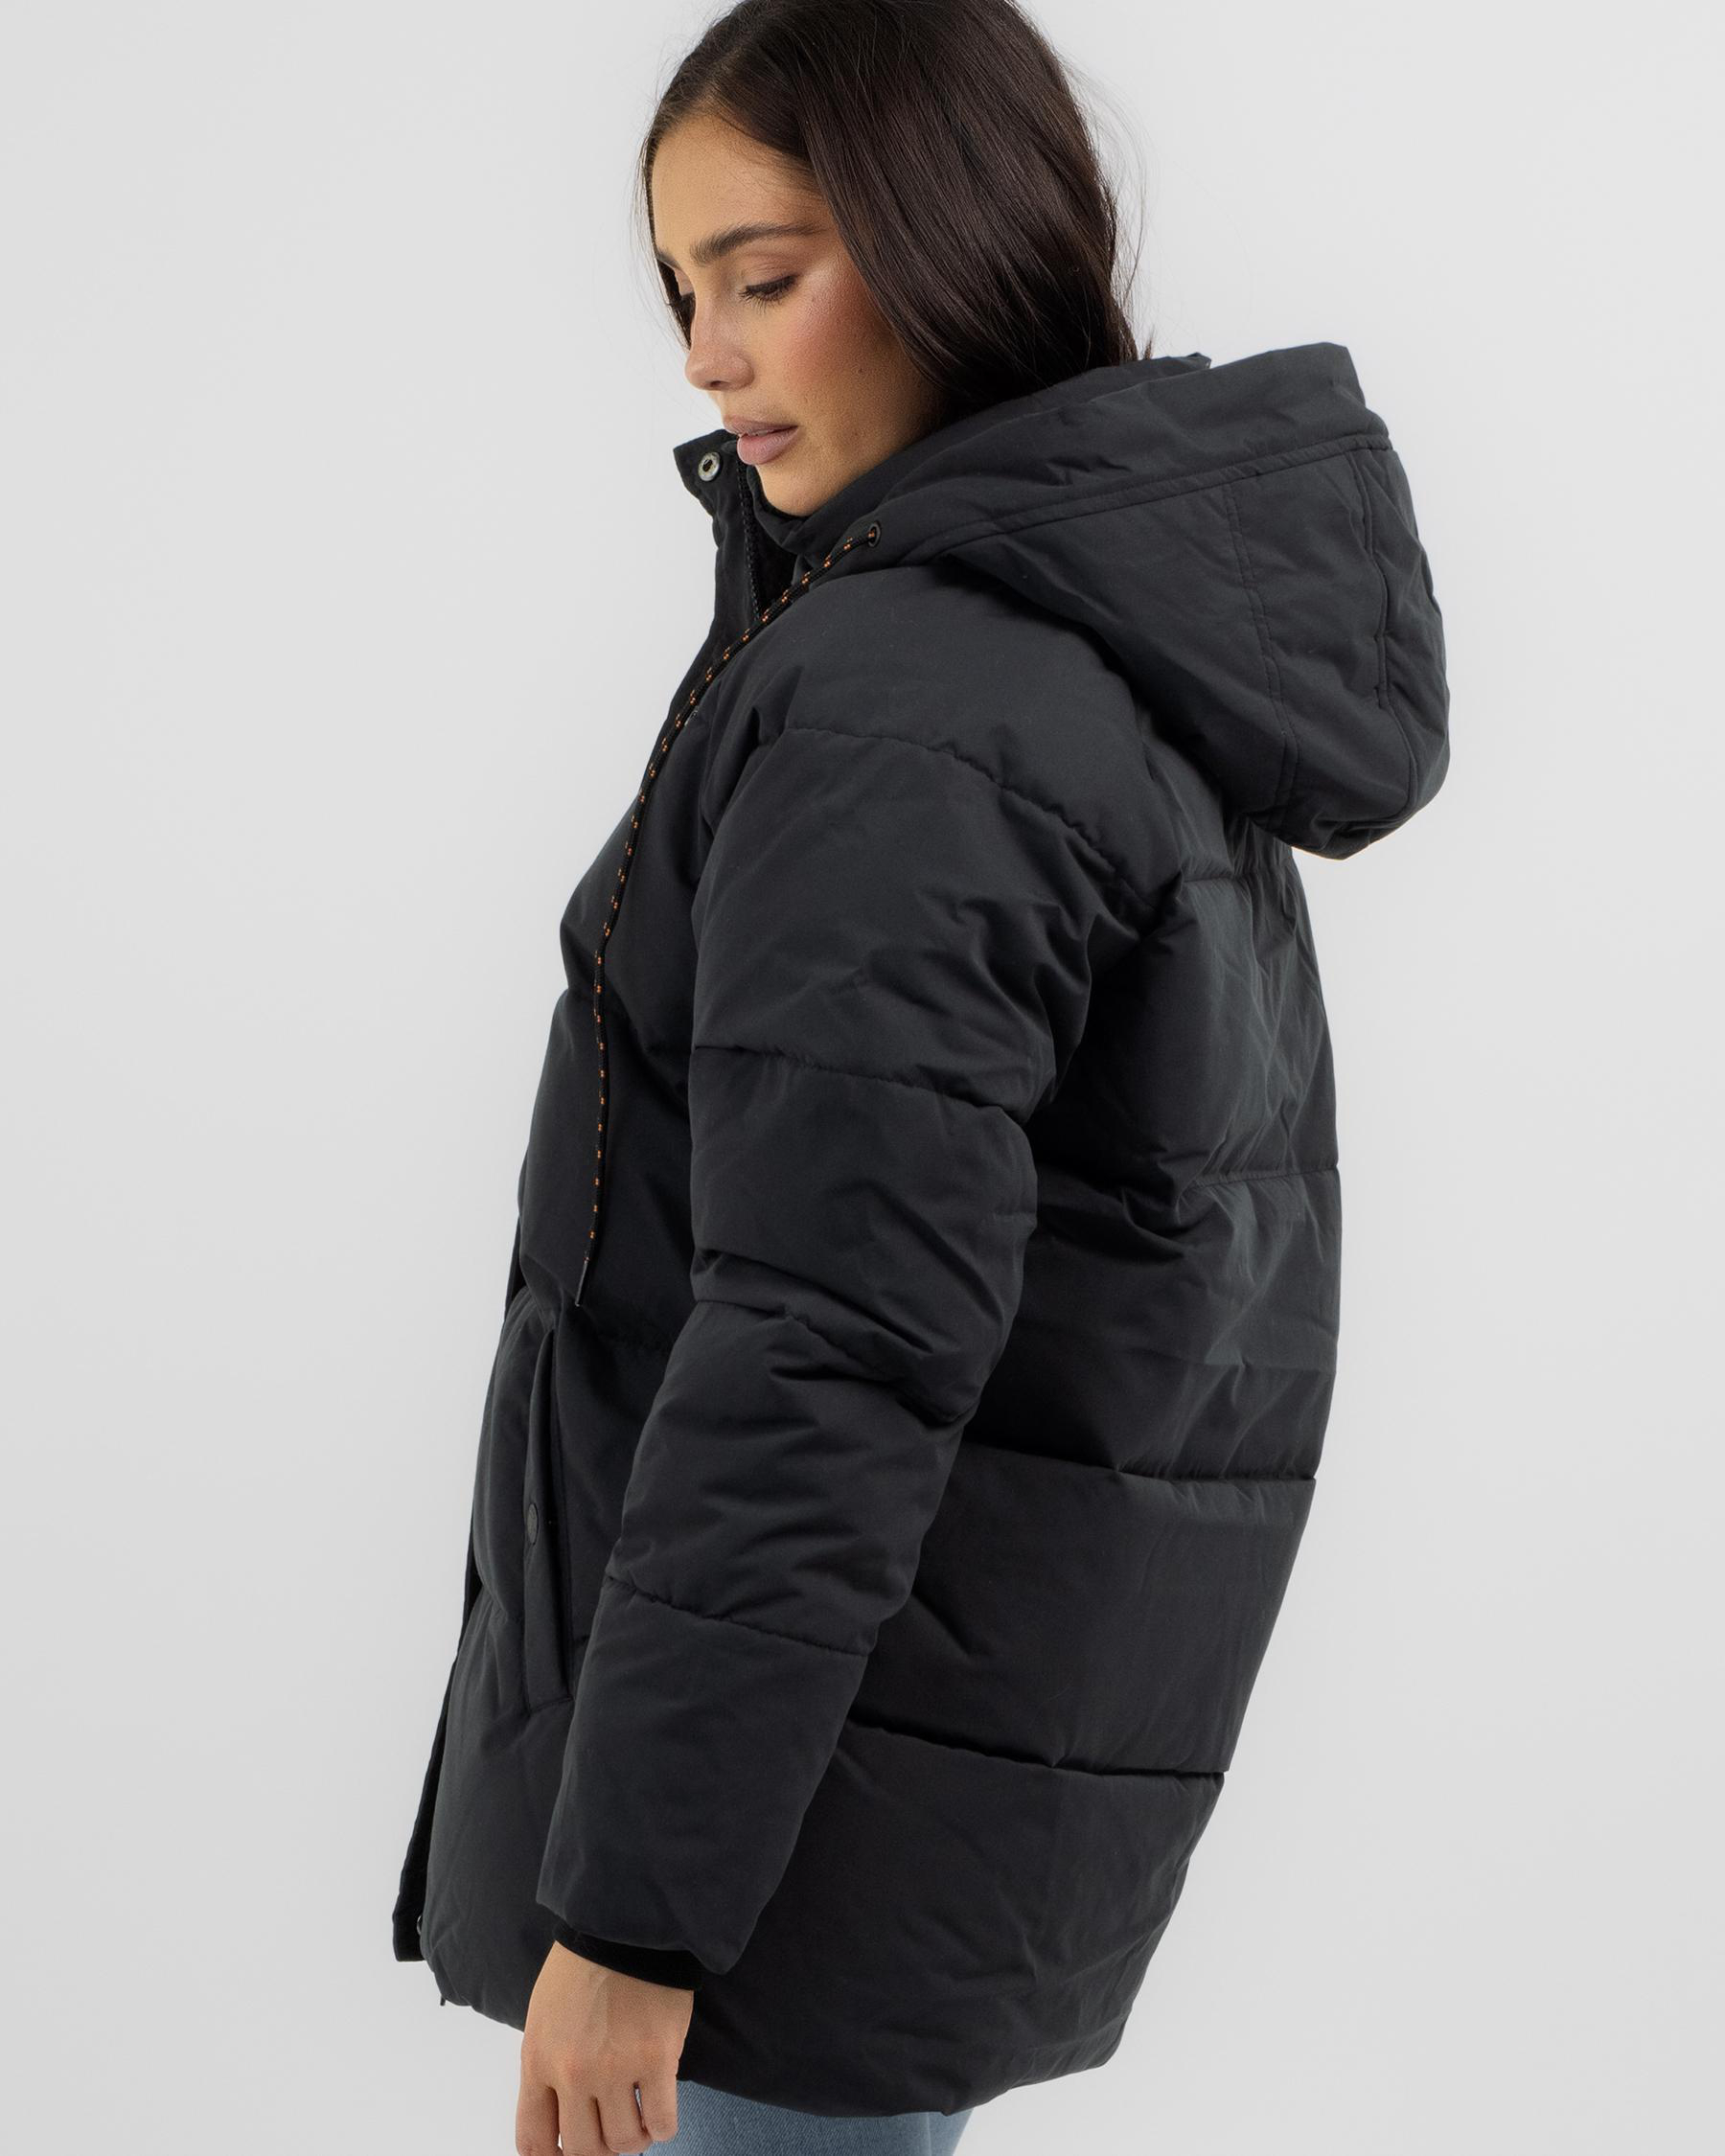 Billabong Artic Shores Hooded Puffer Jacket In Black - FREE* Shipping ...